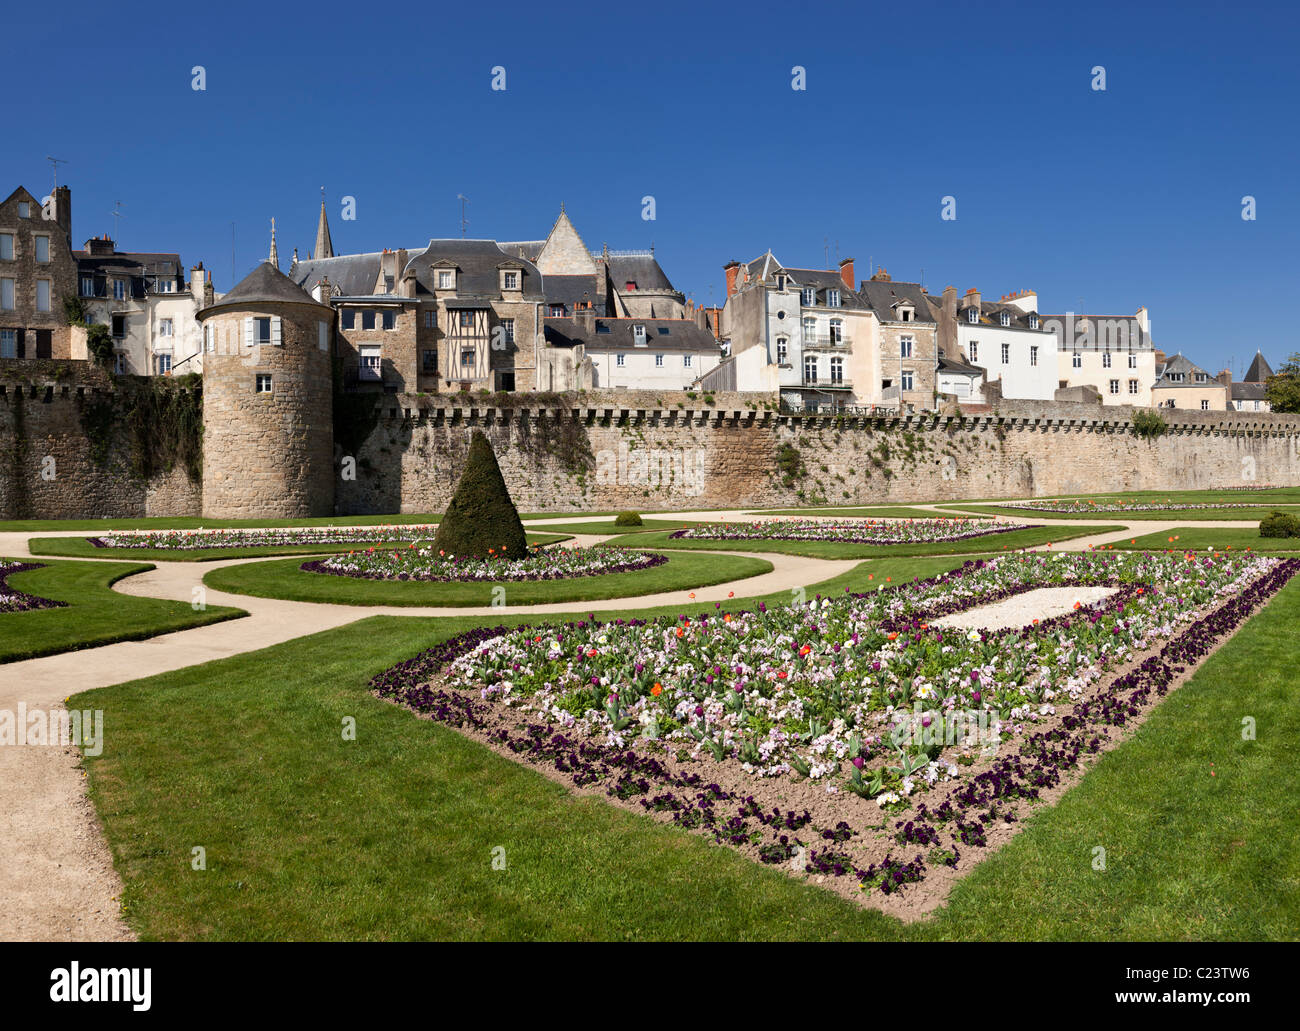 Vannes, Morbihan, Brittany, France - City walls, formal gardens and medieval houses Stock Photo